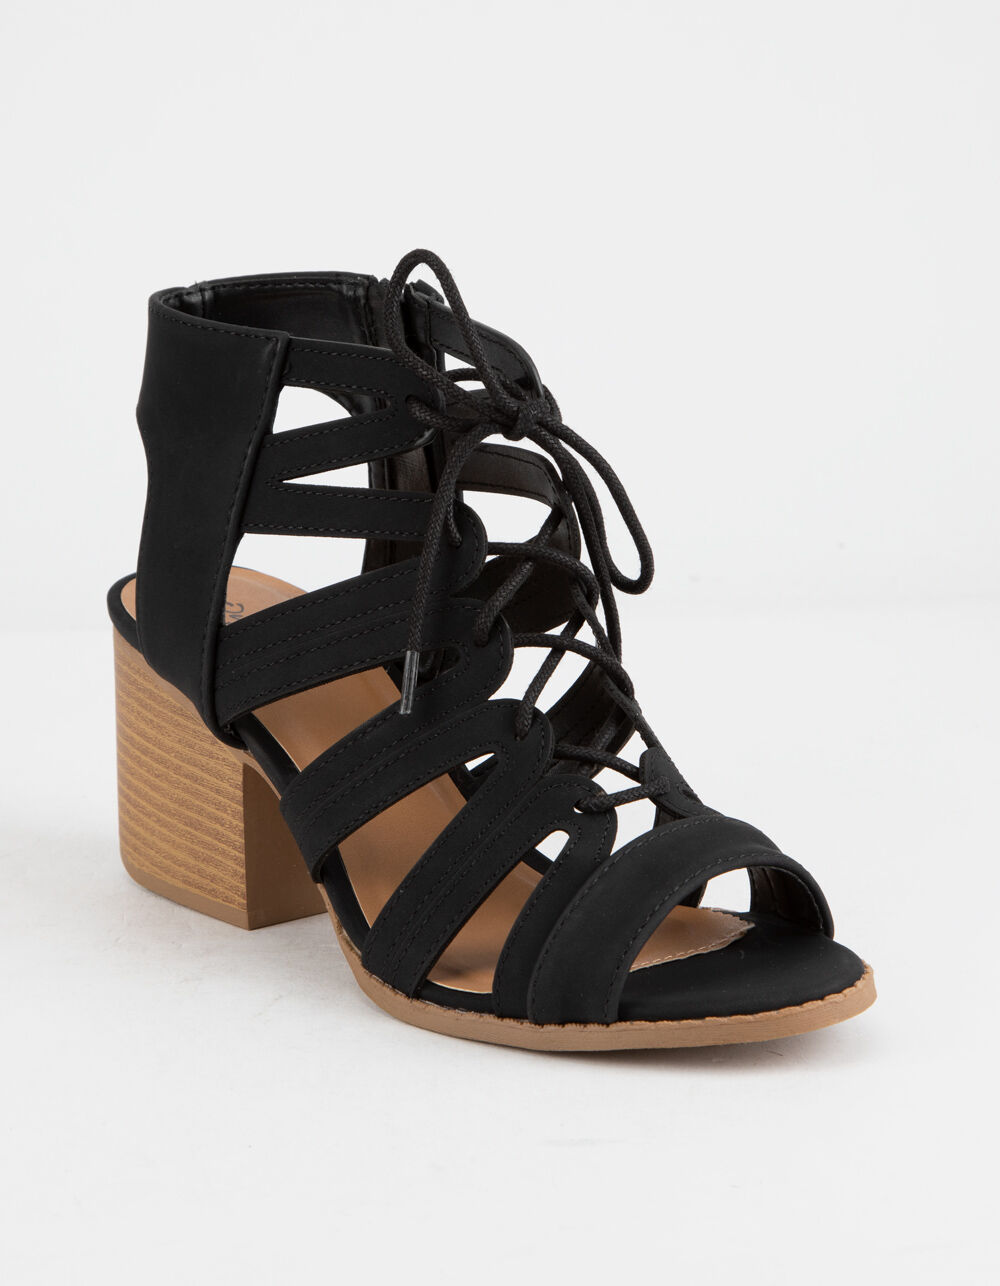 QUPID LACE UP BLACK HEELED SANDALS